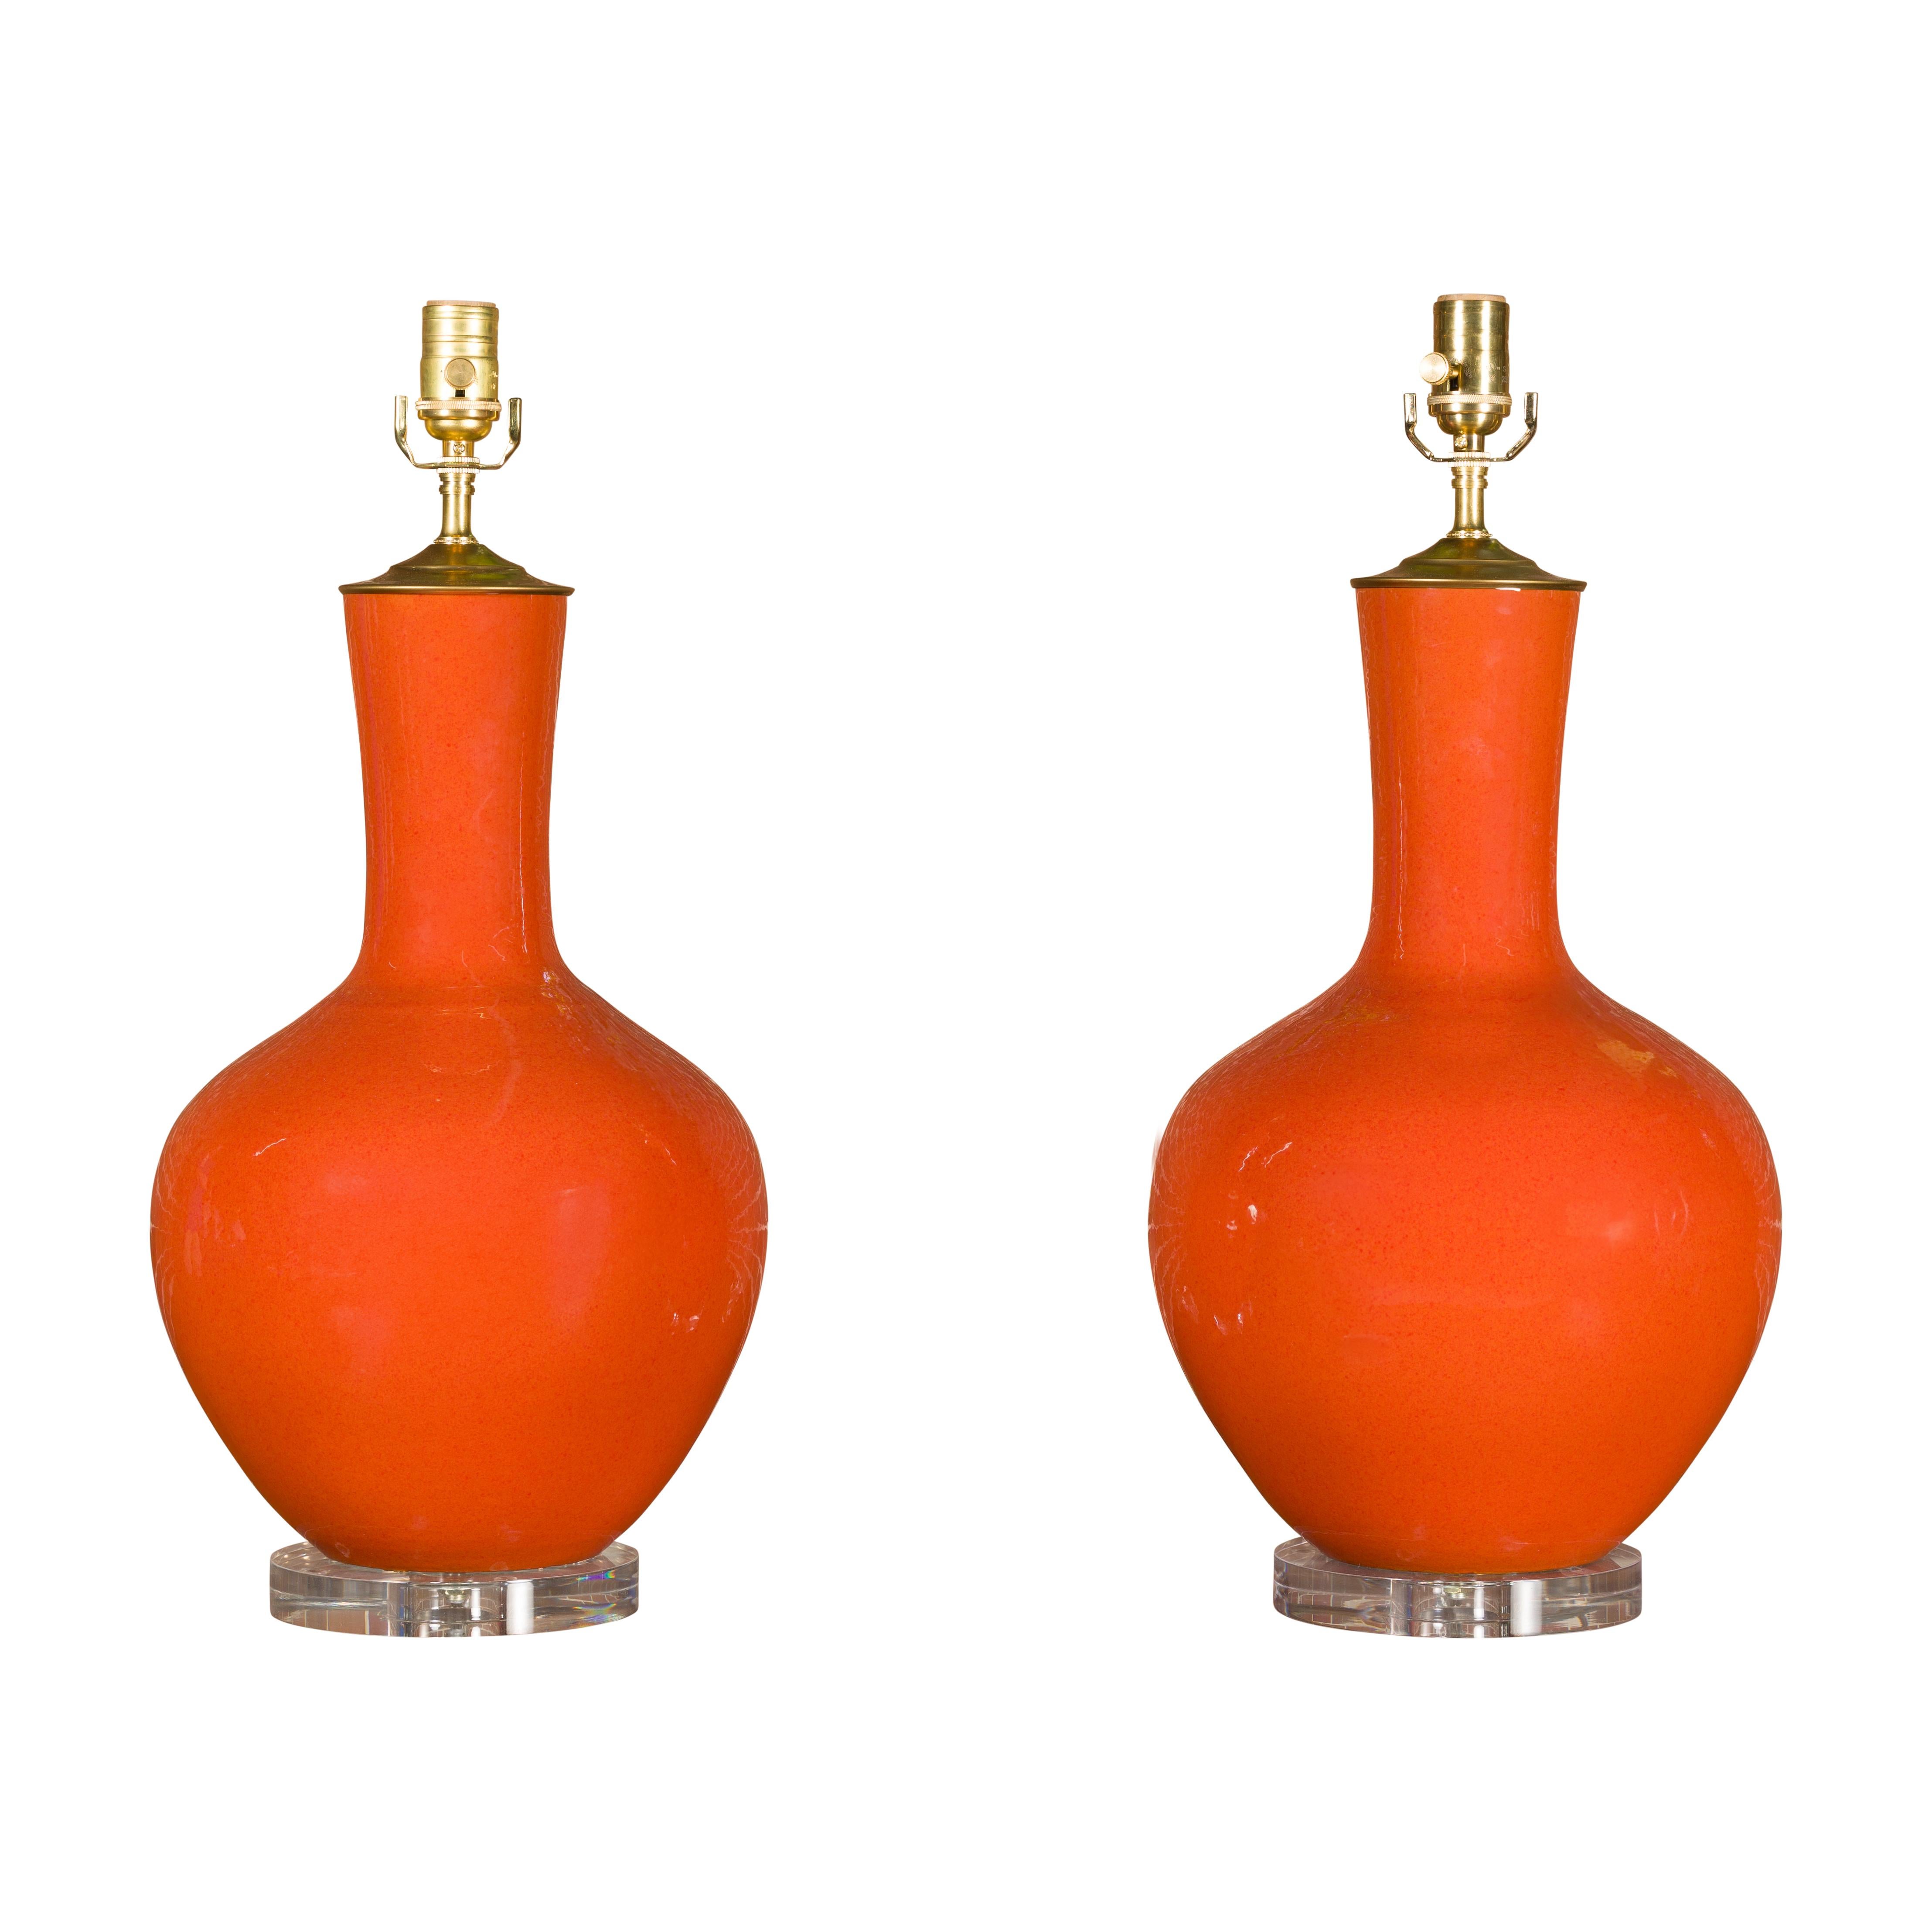 Pair of Burnt Orange Asian Porcelain Table Lamps on Lucite Bases, USA Wired For Sale 11